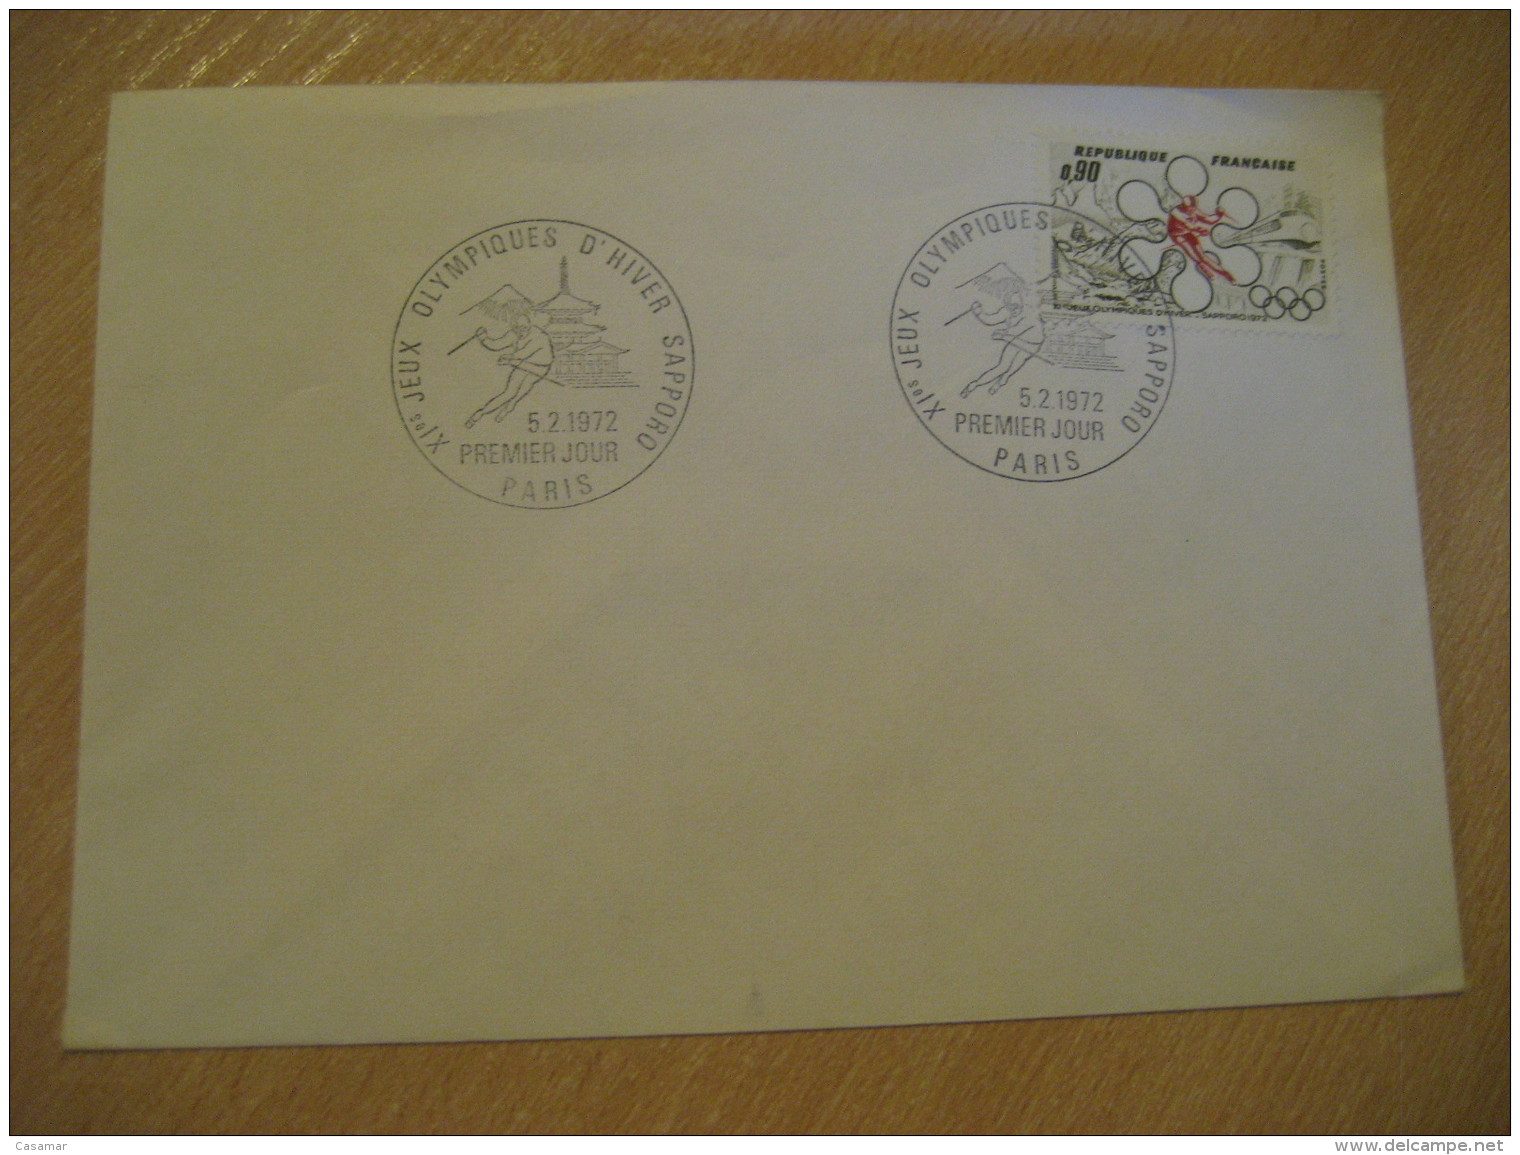 SAPPORO 1972 Winter Olympic Games Olympics Ski Skiing PARIS 1972 FDC Cancel Cover FRANCE Japan - Winter 1972: Sapporo